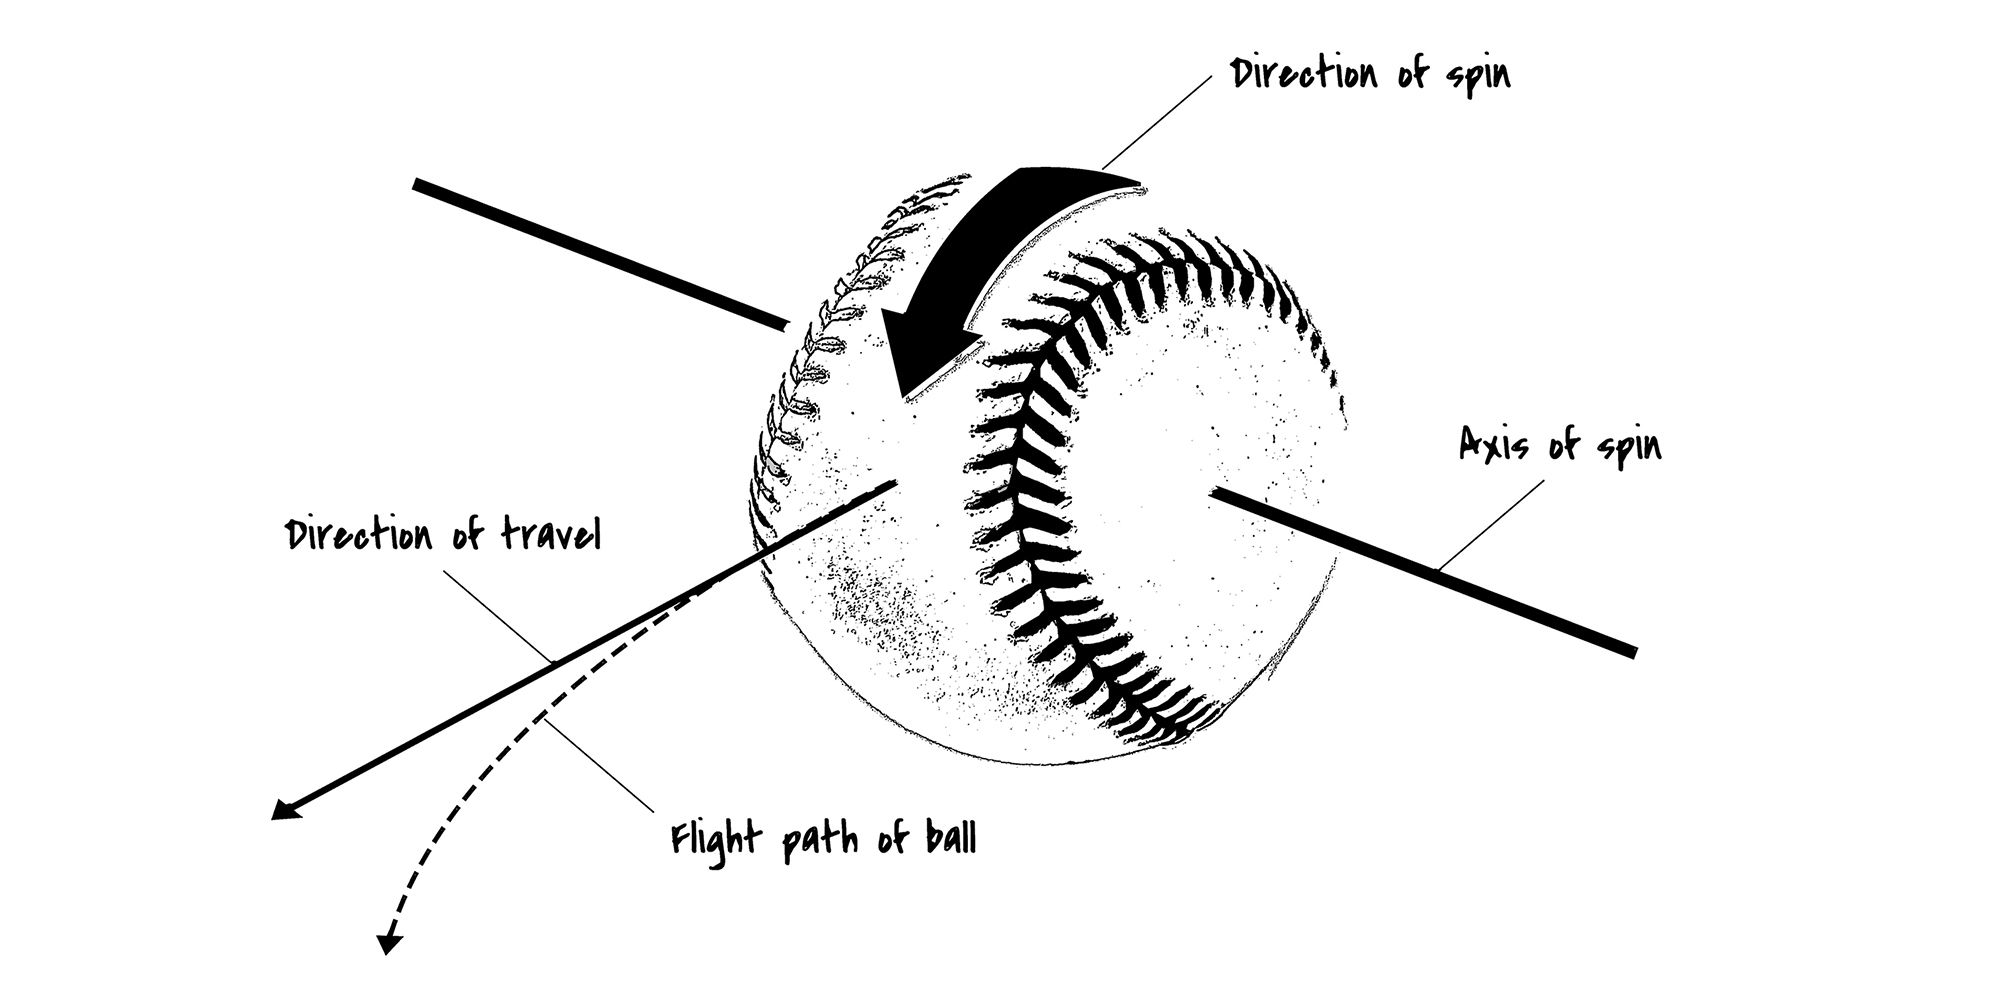 Illustration of baseball showing axis of spin, direction of travel, direction of spin and flight path of ball.